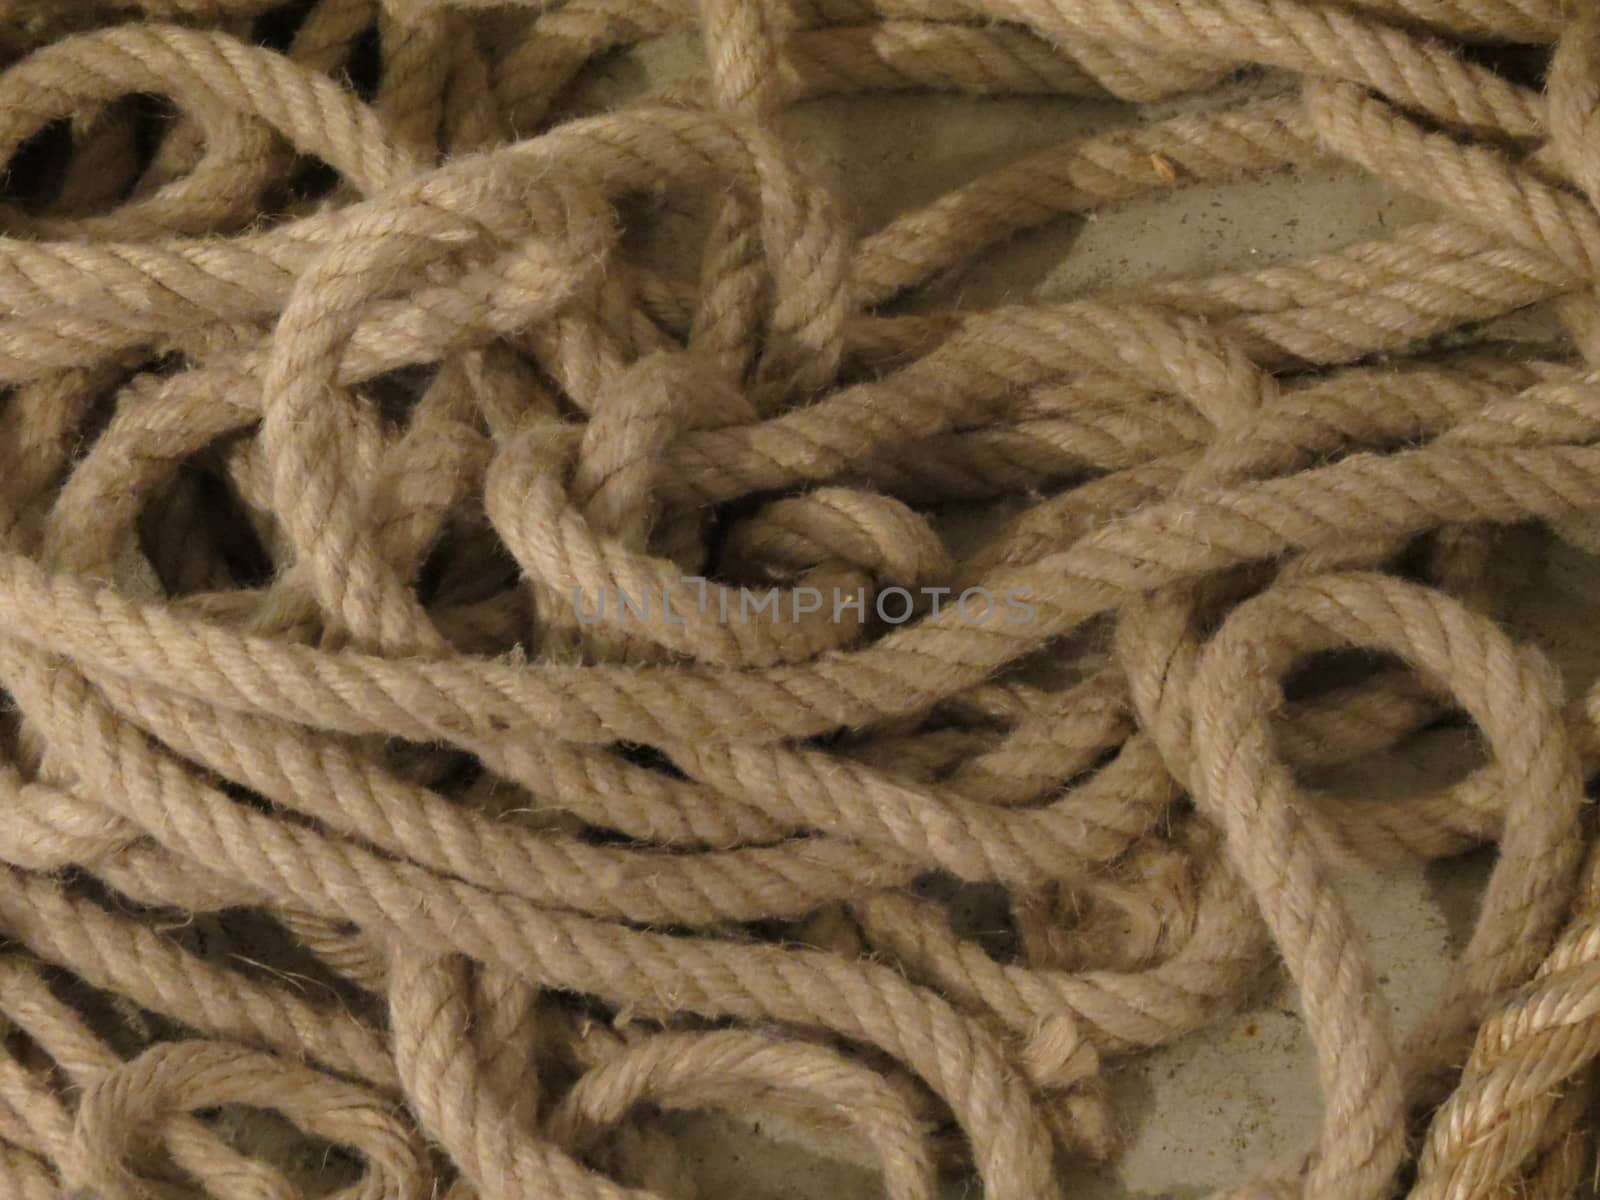 seaman's rope by paolo77